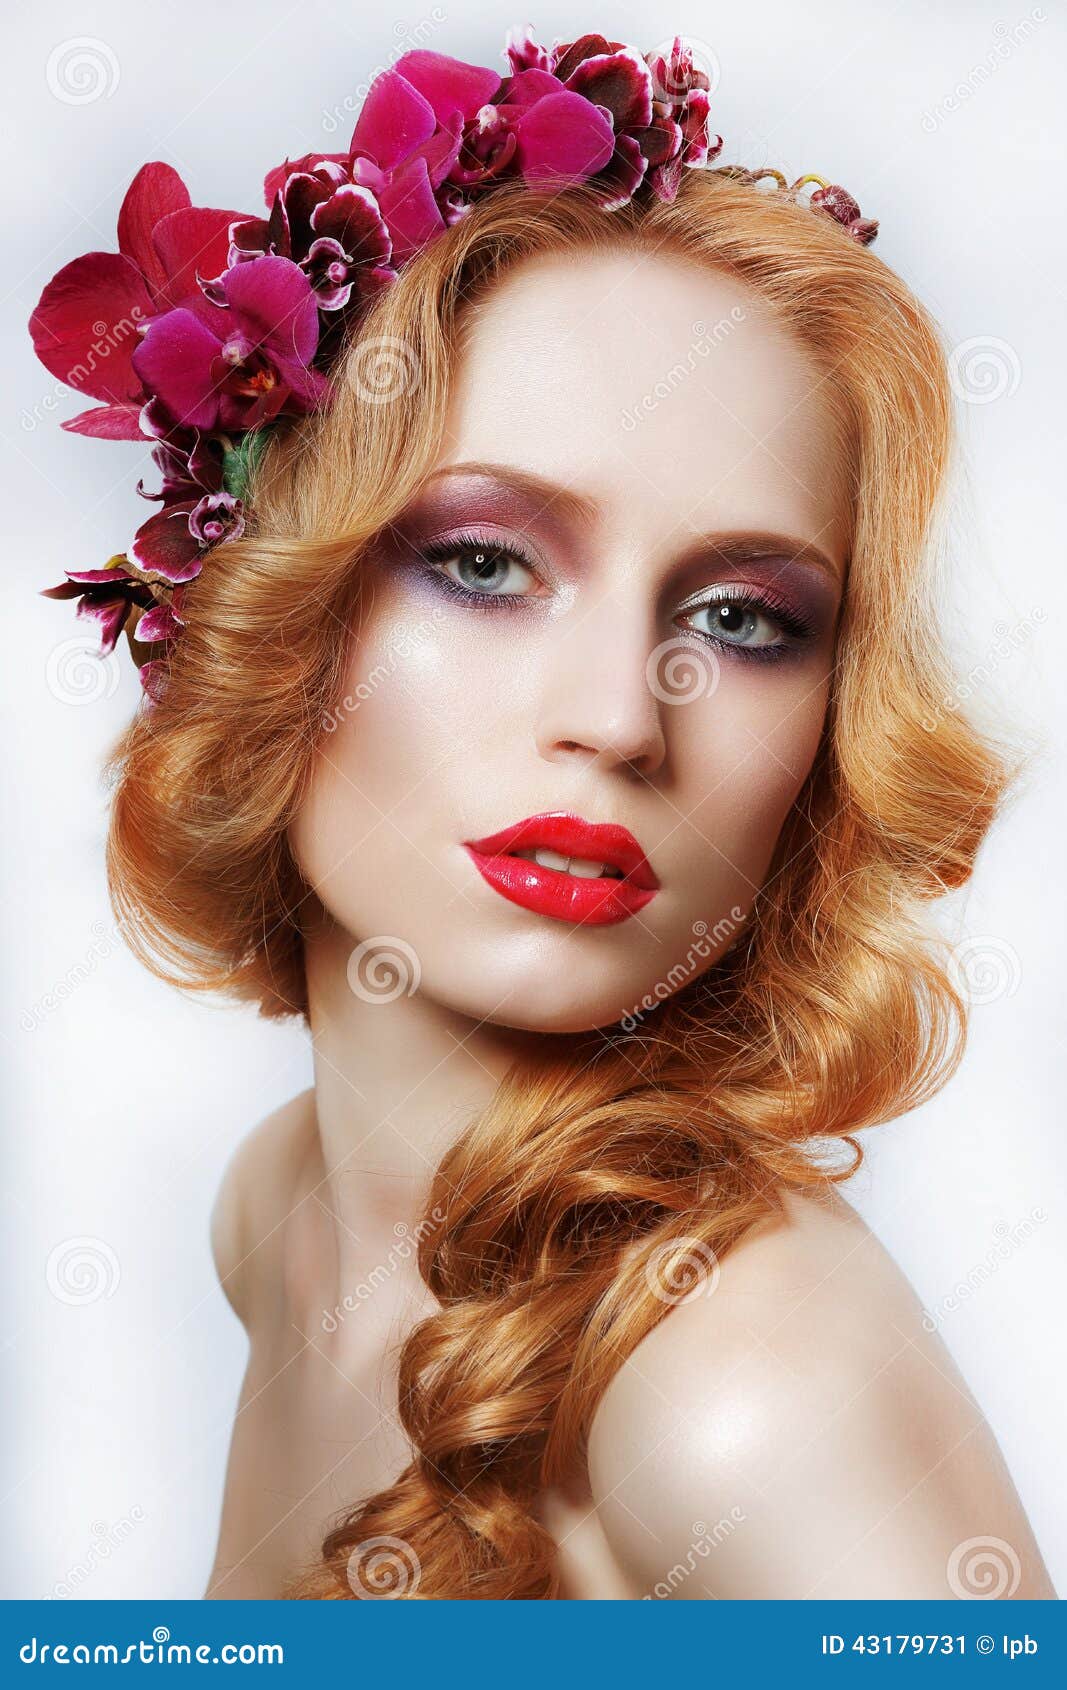 exquisite auburn woman with wreath of flowers and tress